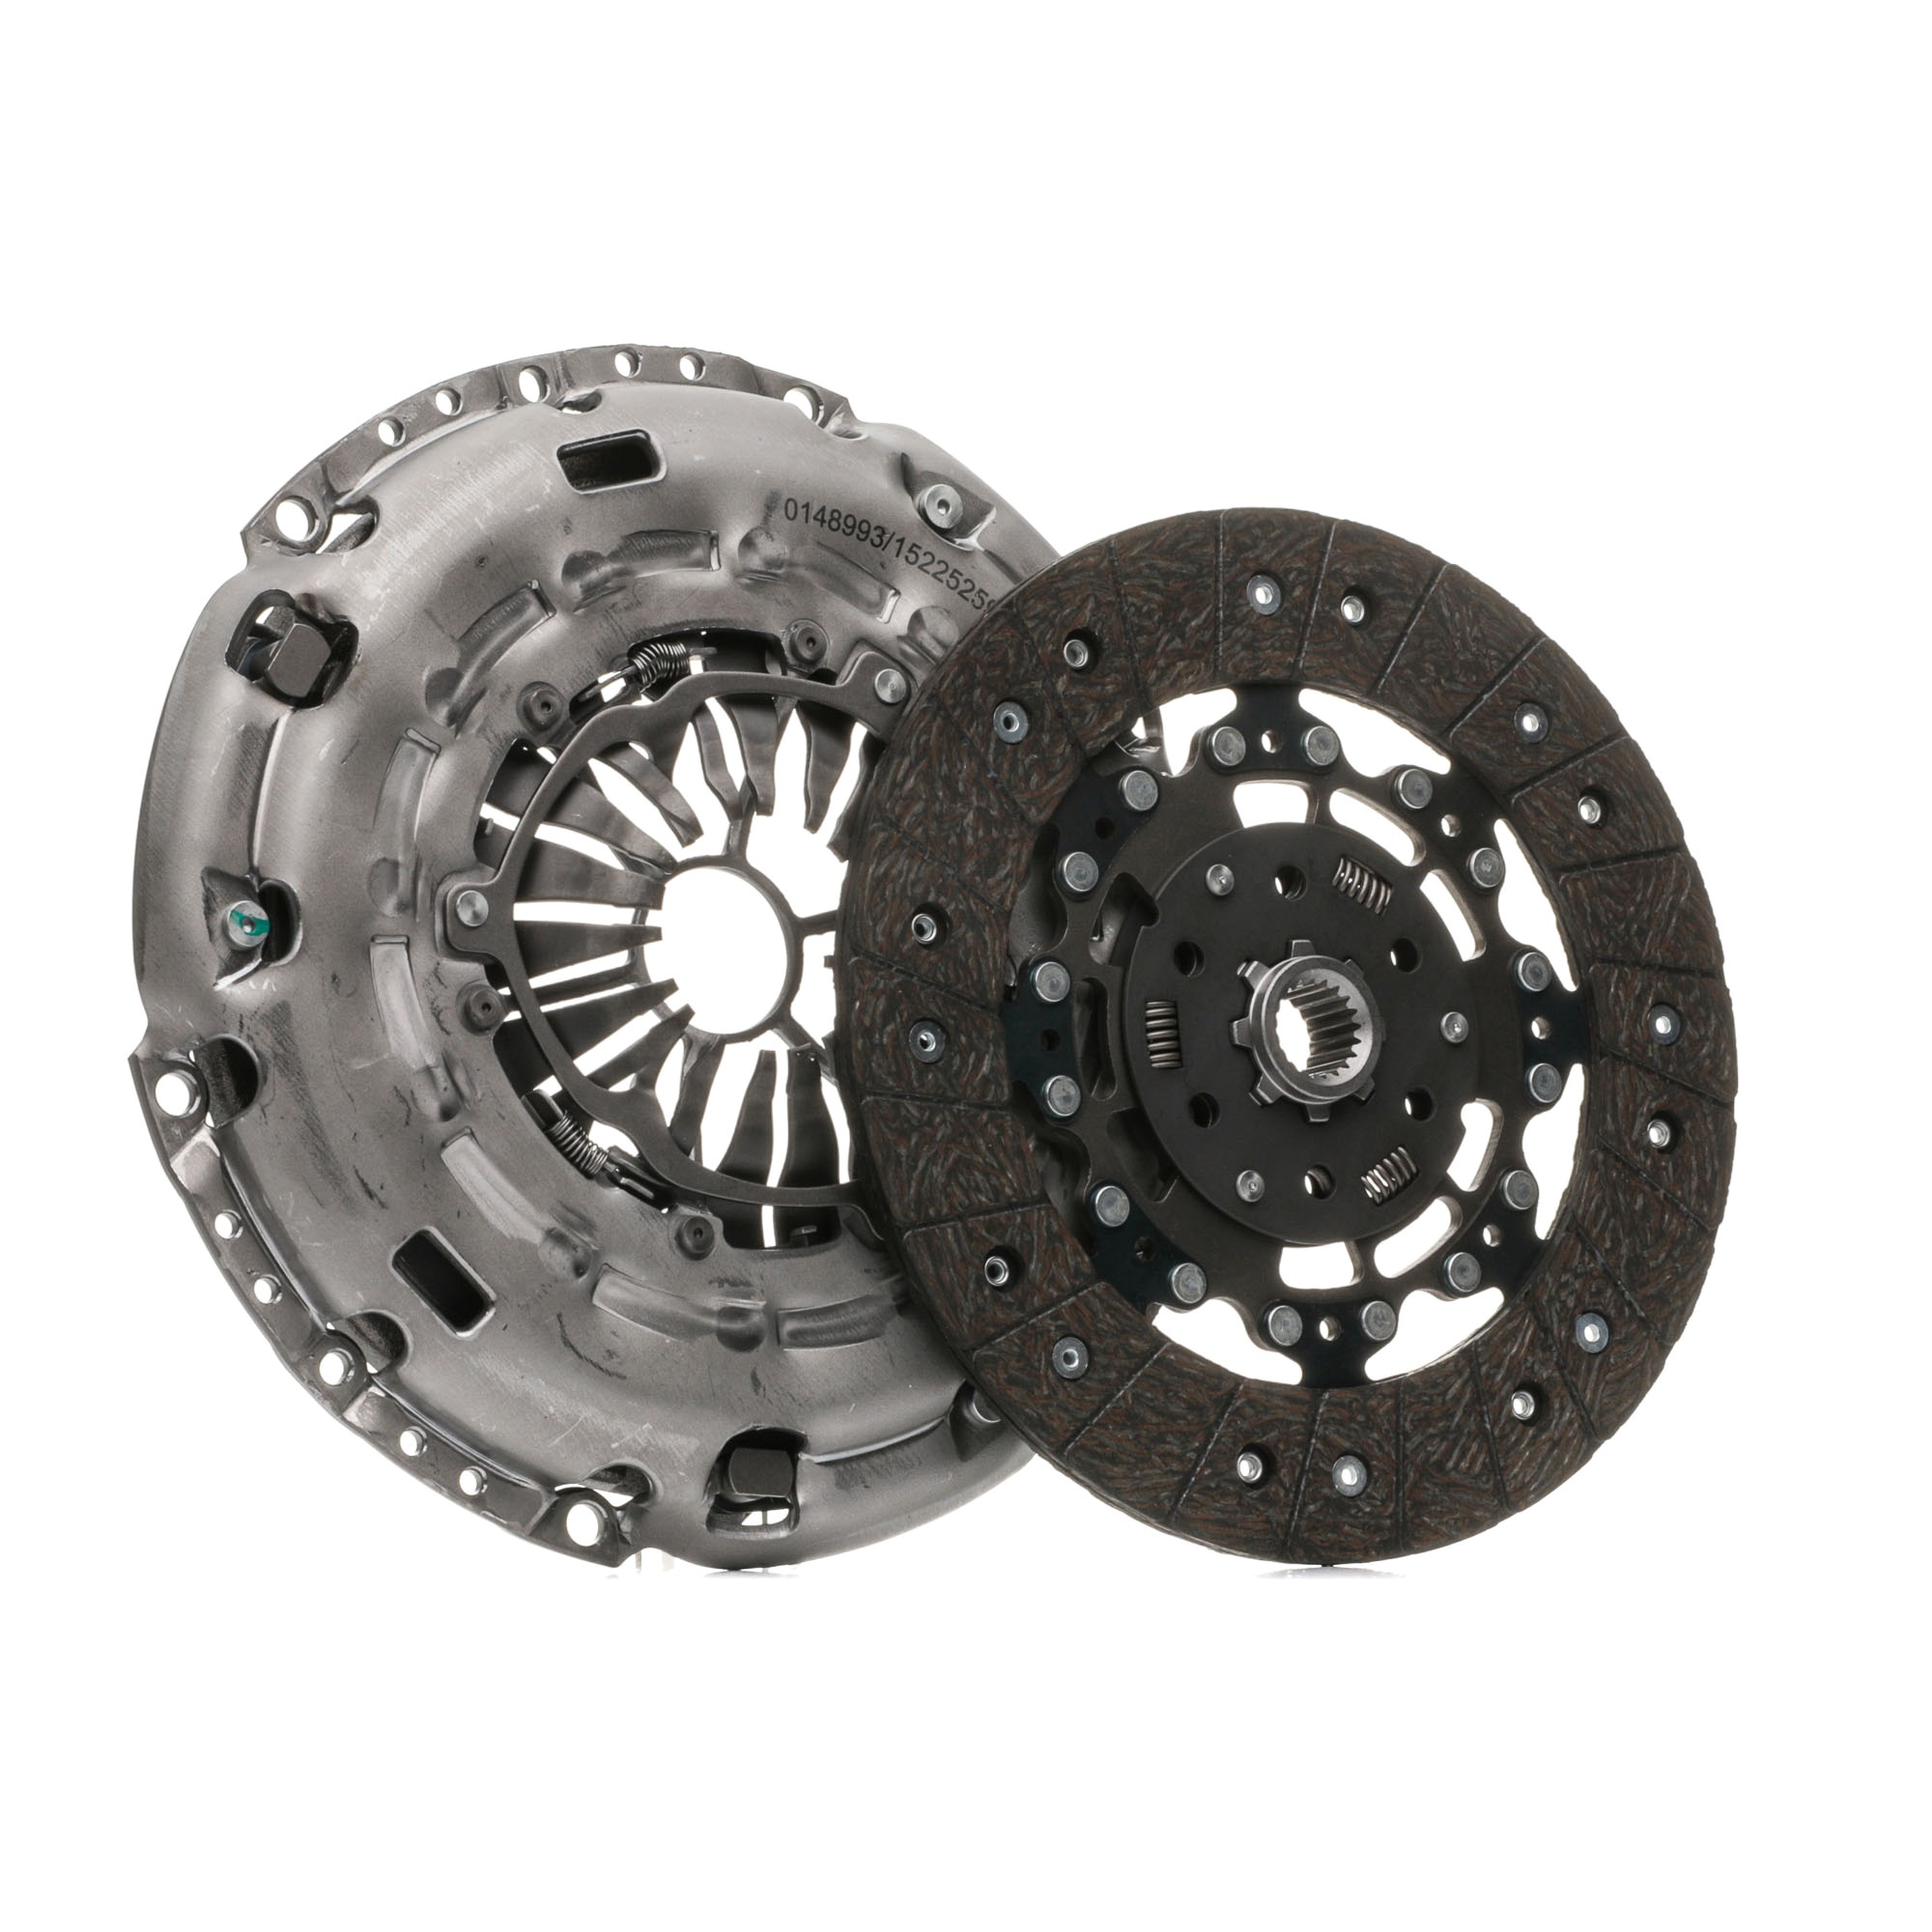 STARK SKCK-0100462 Clutch kit two-piece, with clutch pressure plate, without central slave cylinder, with clutch disc, 240mm